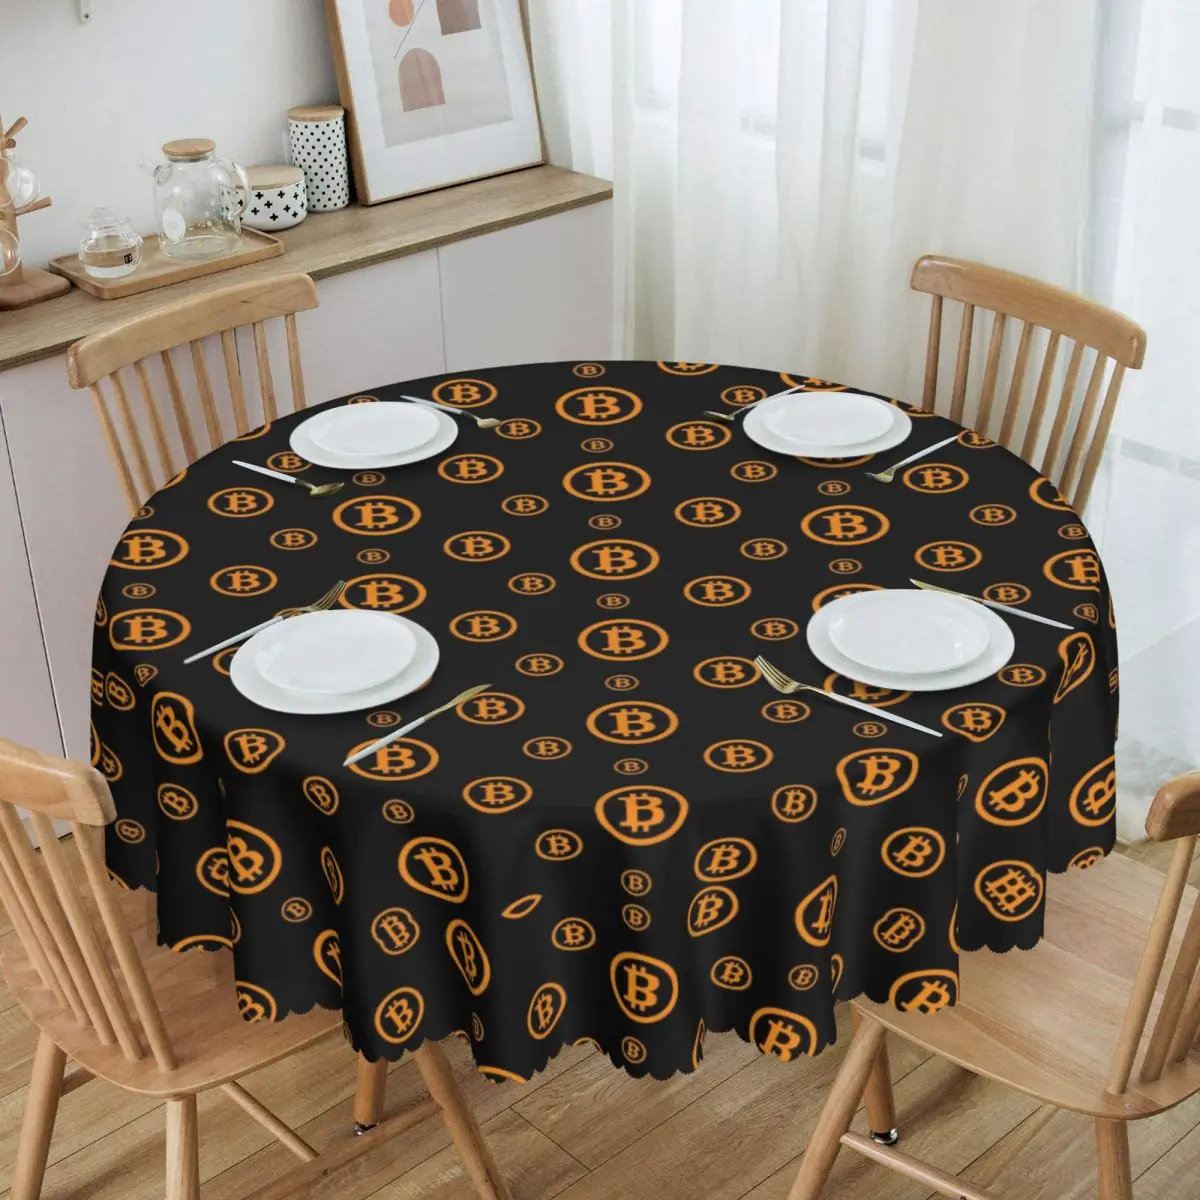 

Round Bitcoin Logo Pattern Table Cloth Oilproof Tablecloth 60 inches Table Cover for Kitchen Dinning